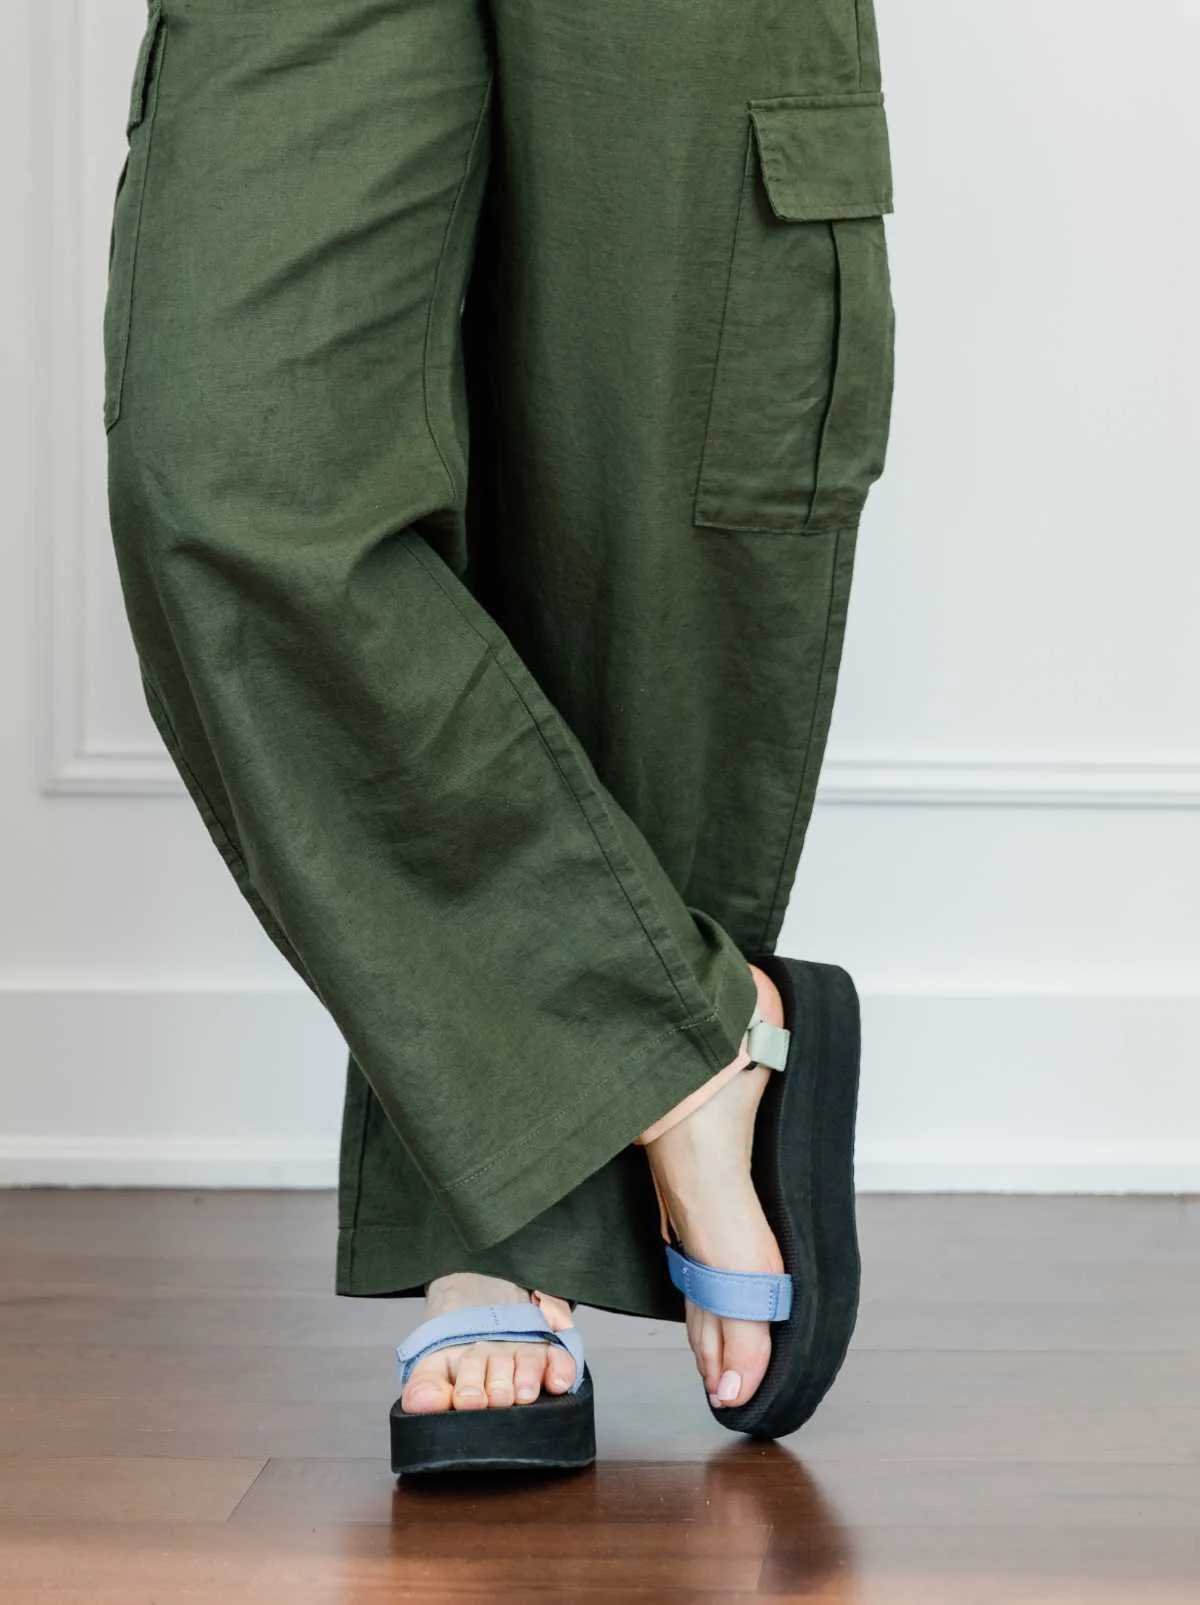 Cropped view of woman's legs wearing colorful platform Teva sandals with full length wide olive green linen pants.